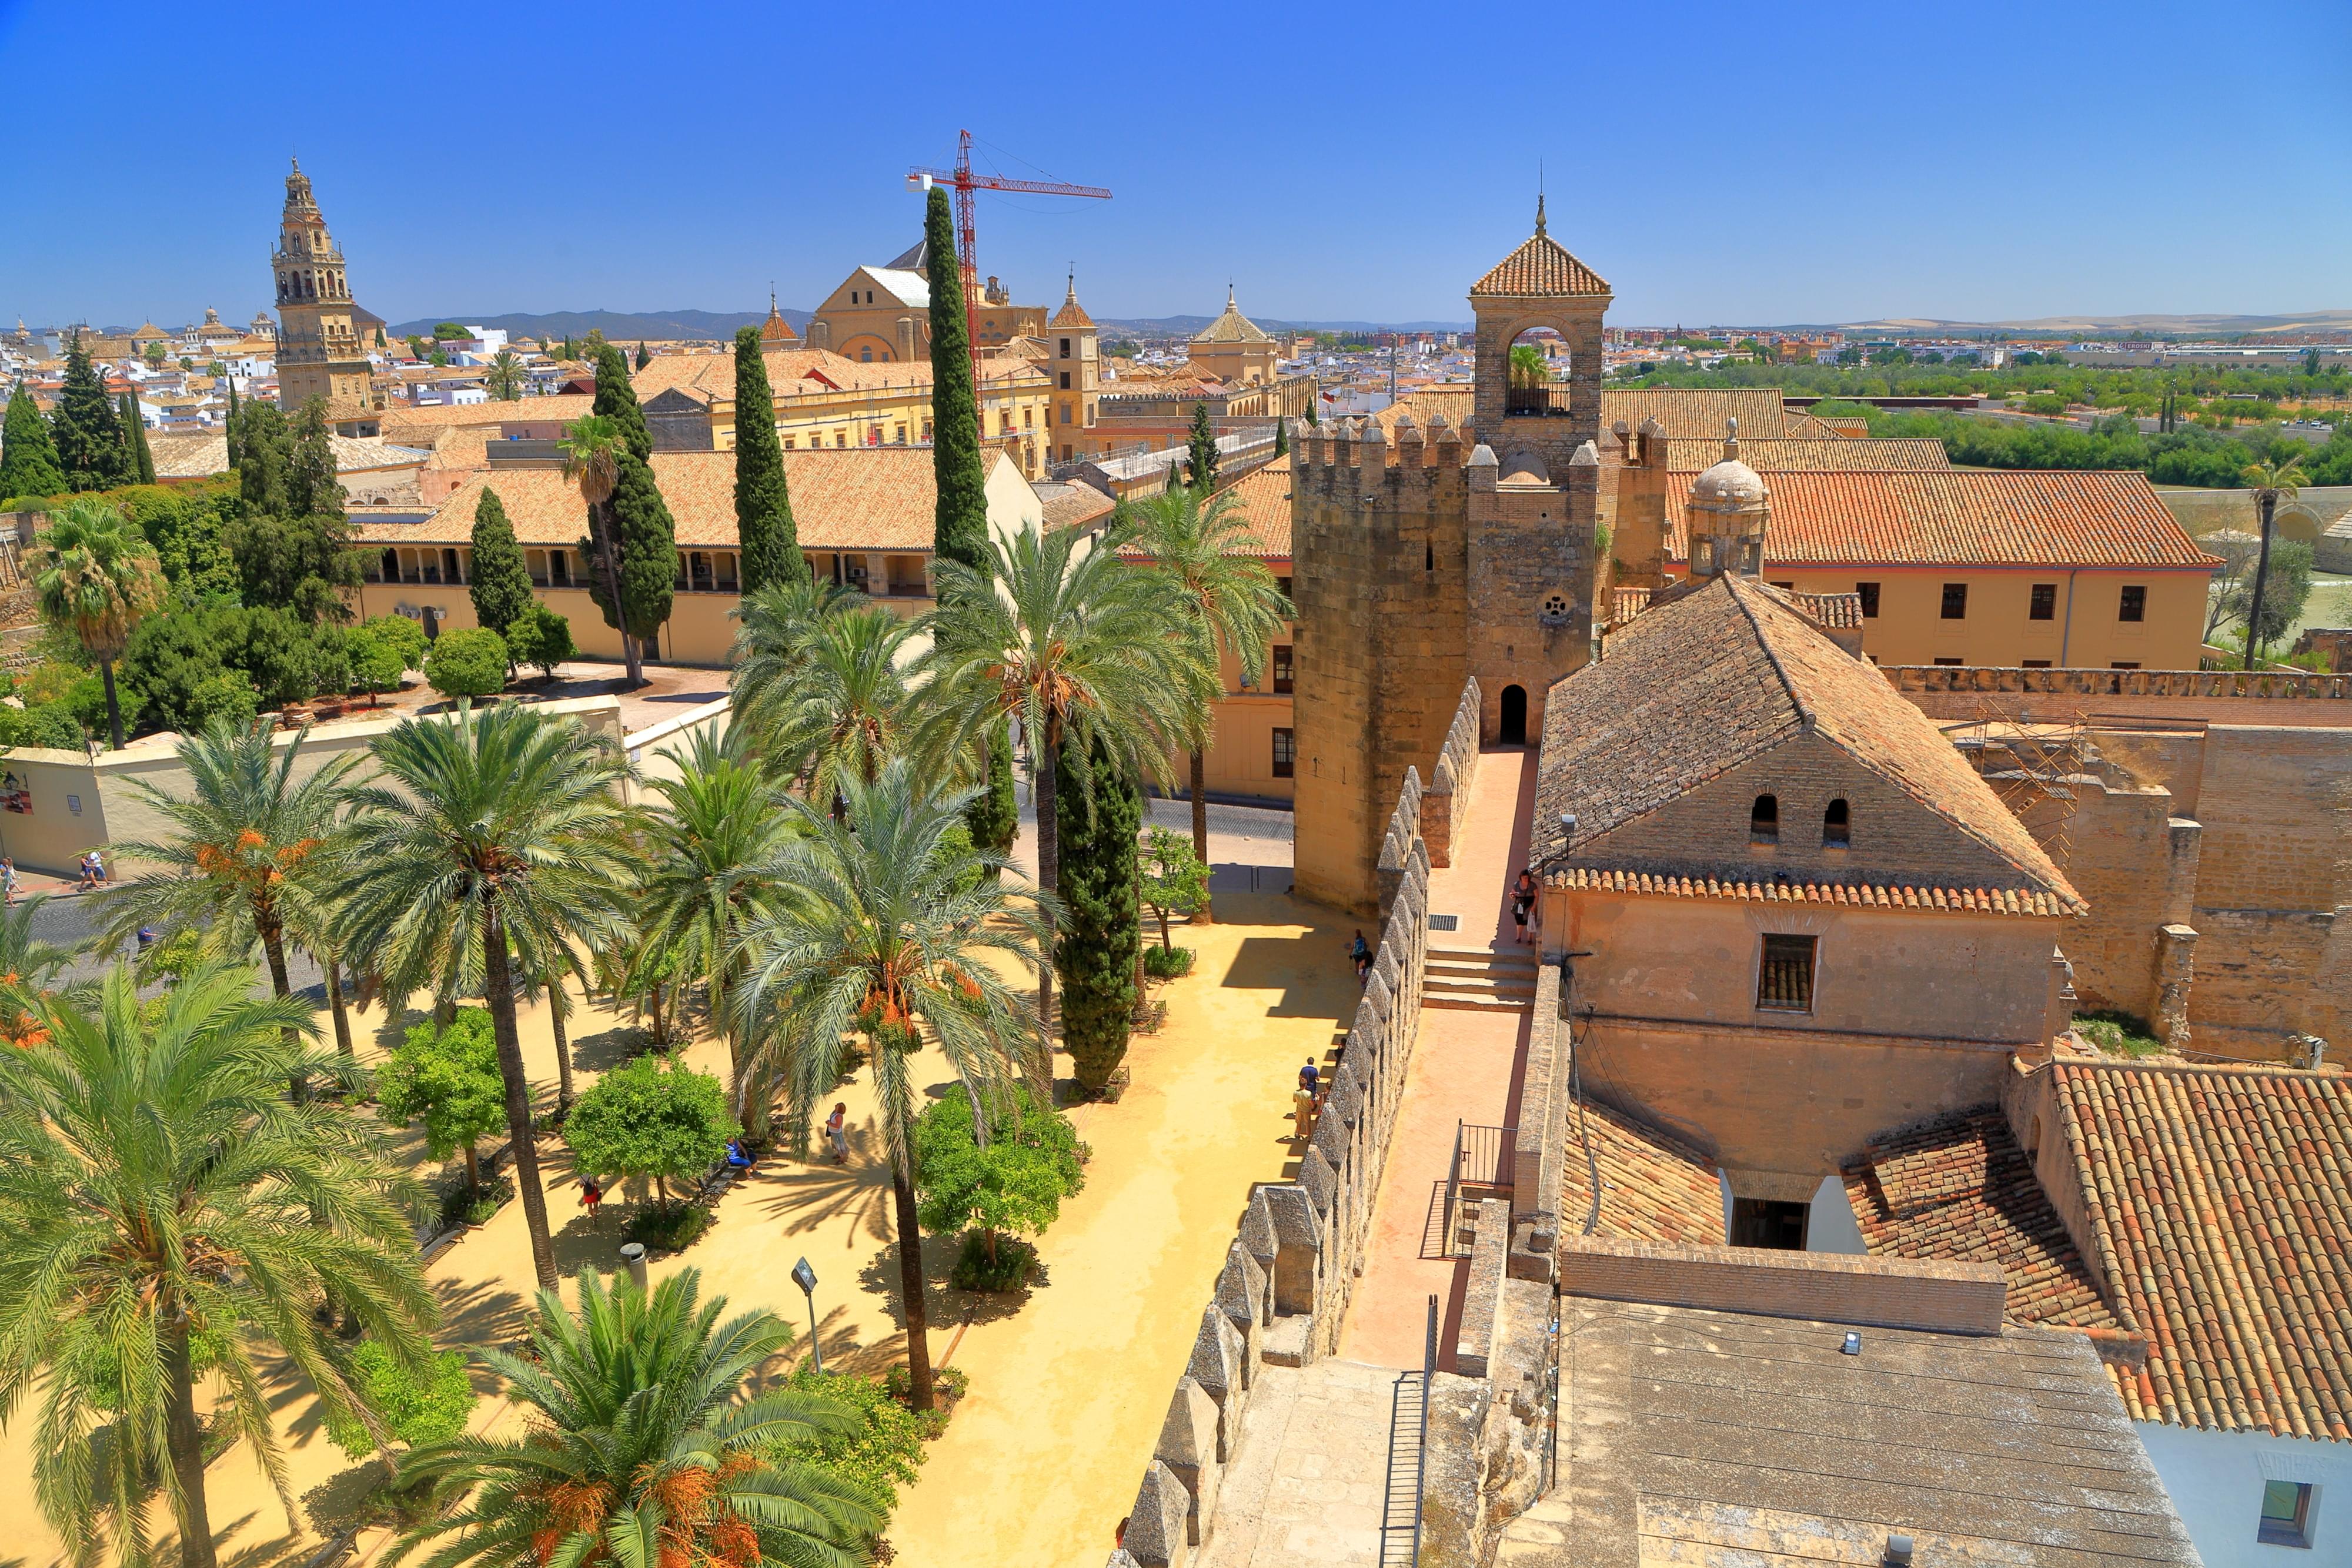 Visit the Alcazar of the Christian Monarchs, the famous World Heritage Site